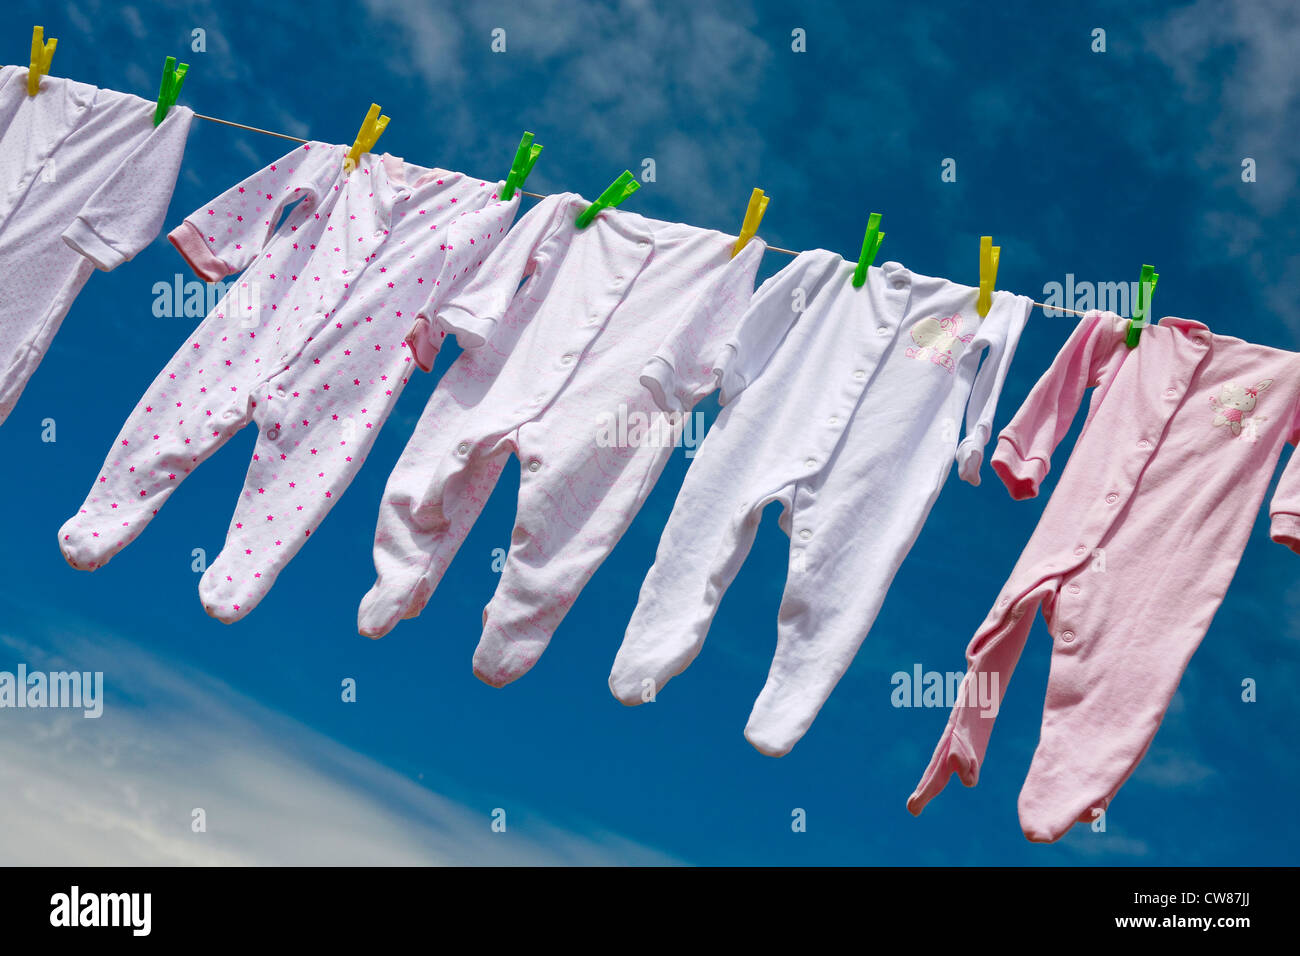 Baby grows hanging on a washing line Stock Photo